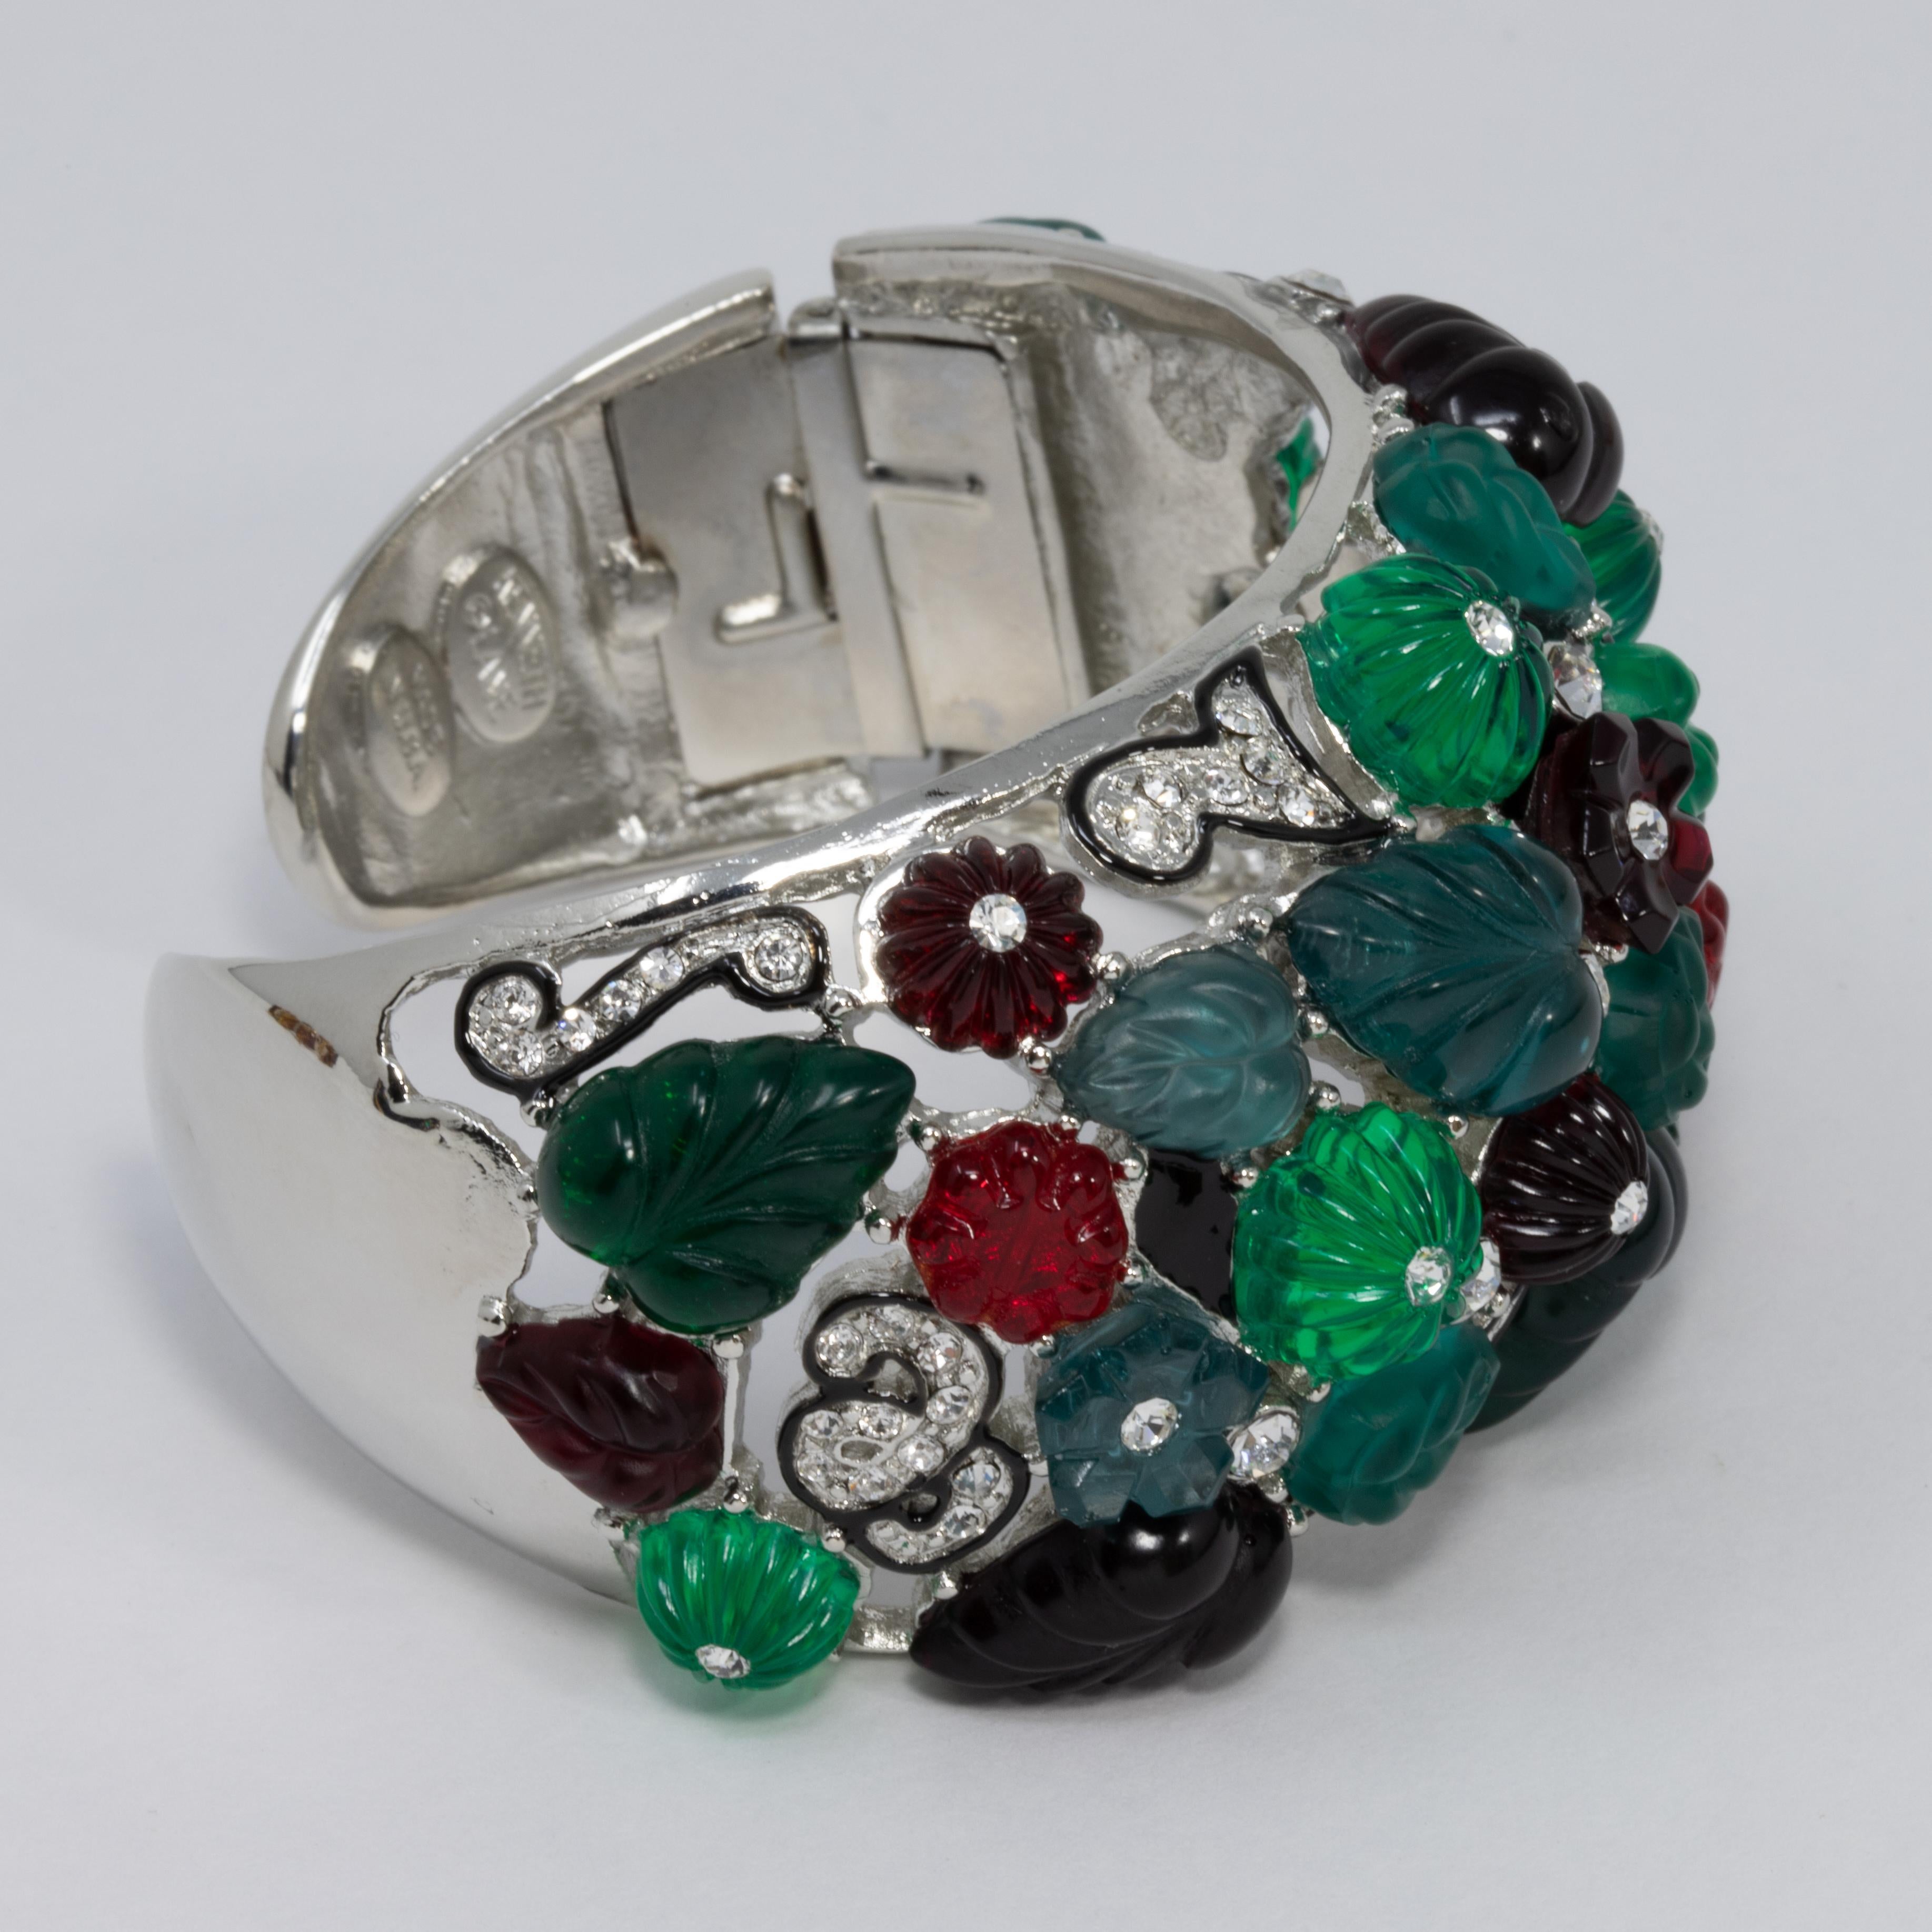 Bracelet by Kenneth Jay Lane. Tutti frutti resin motifs in green, red, and blue accented with clear crystals. Set on rhodium plating.

Hallmarks: Kenneth Lane, Made in USA

Inner diameter at widest part 5.8cm
Inner circumference 16cm